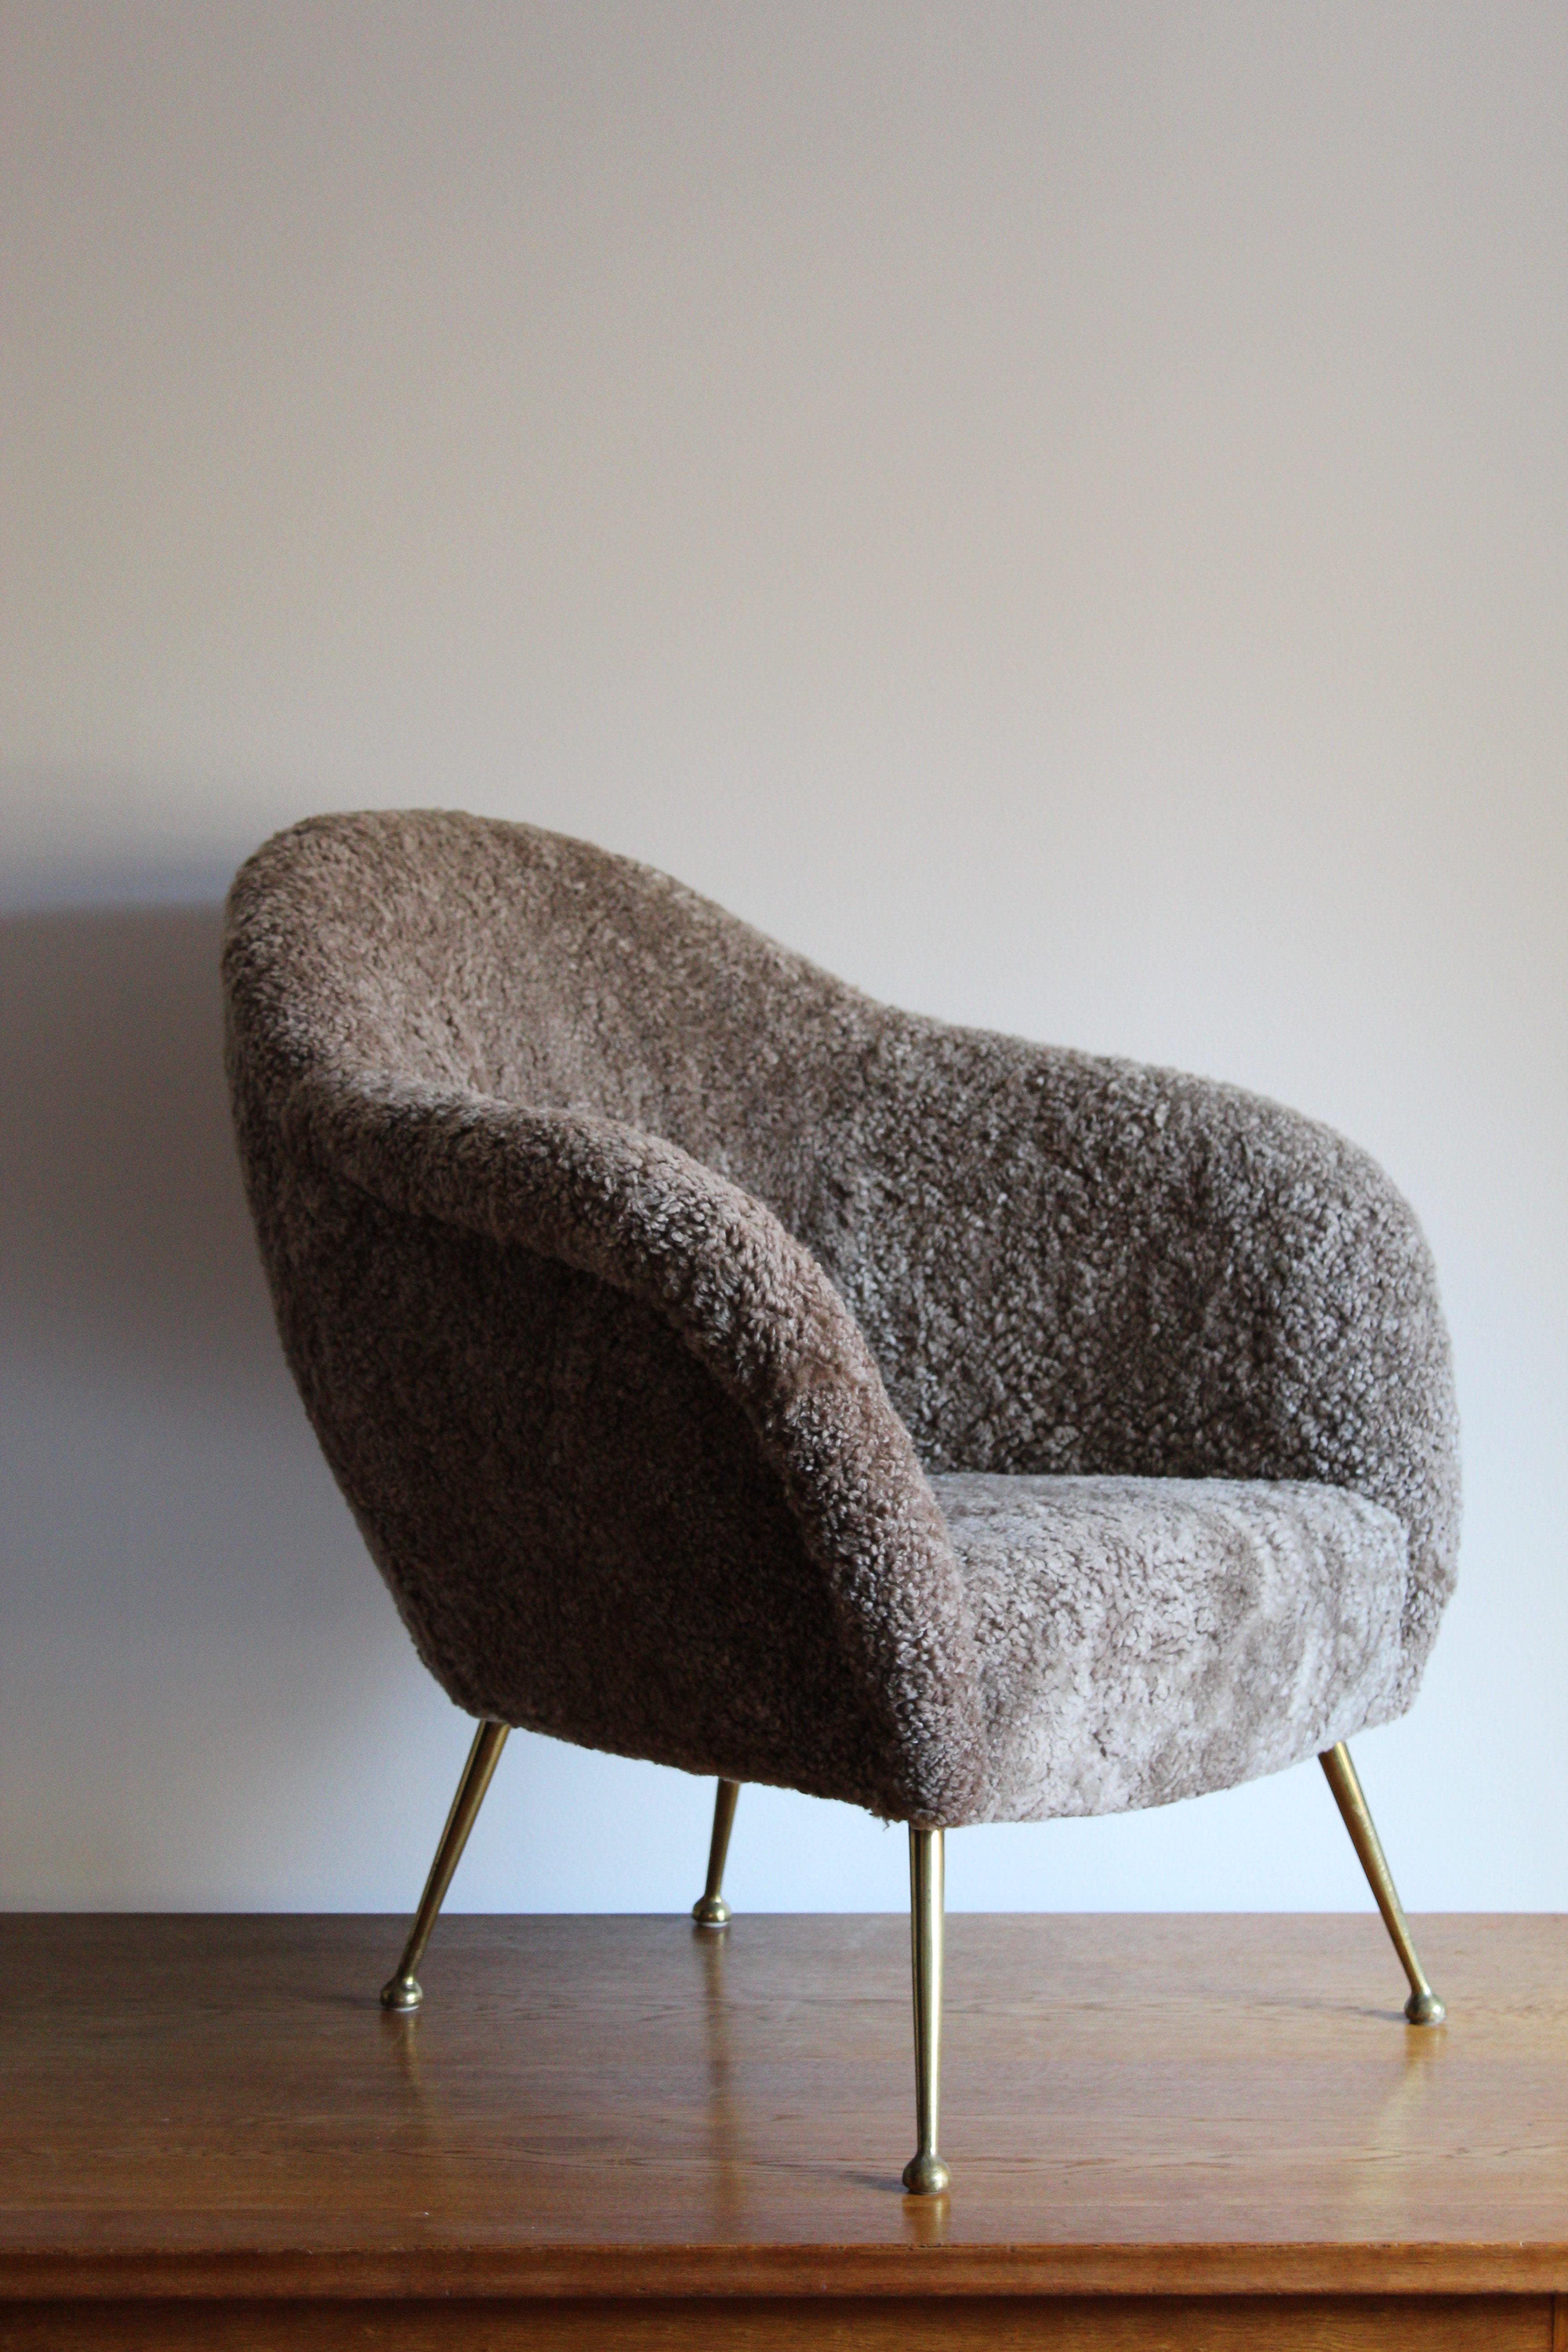 A organic modernist lounge chair. Produced in Italy, 1950s. Newly reupholstered in brand new authentic sheepskin upholstery.

Other designers of the period include Federico Munari, Guglielmo Veronesi, Gio Ponti, Ico Parisi, and Franco Albini.